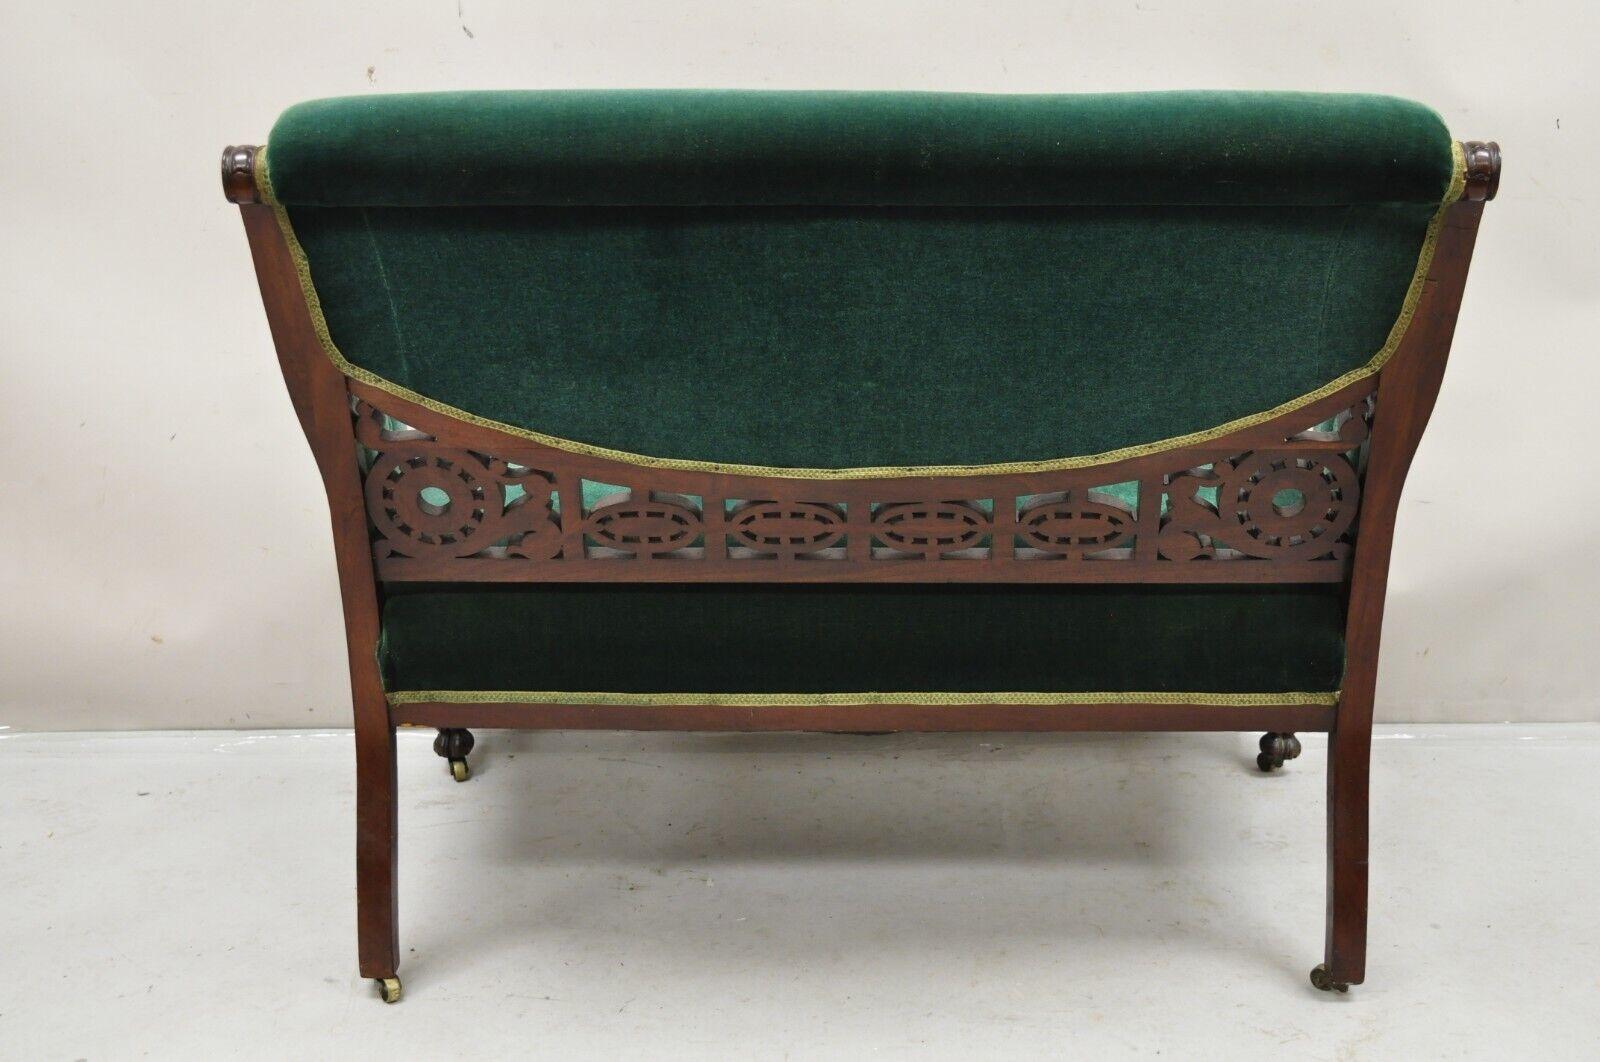 Antique Victorian Green Mohair Fretwork Carved Mahogany Parlor Loveseat Settee 6